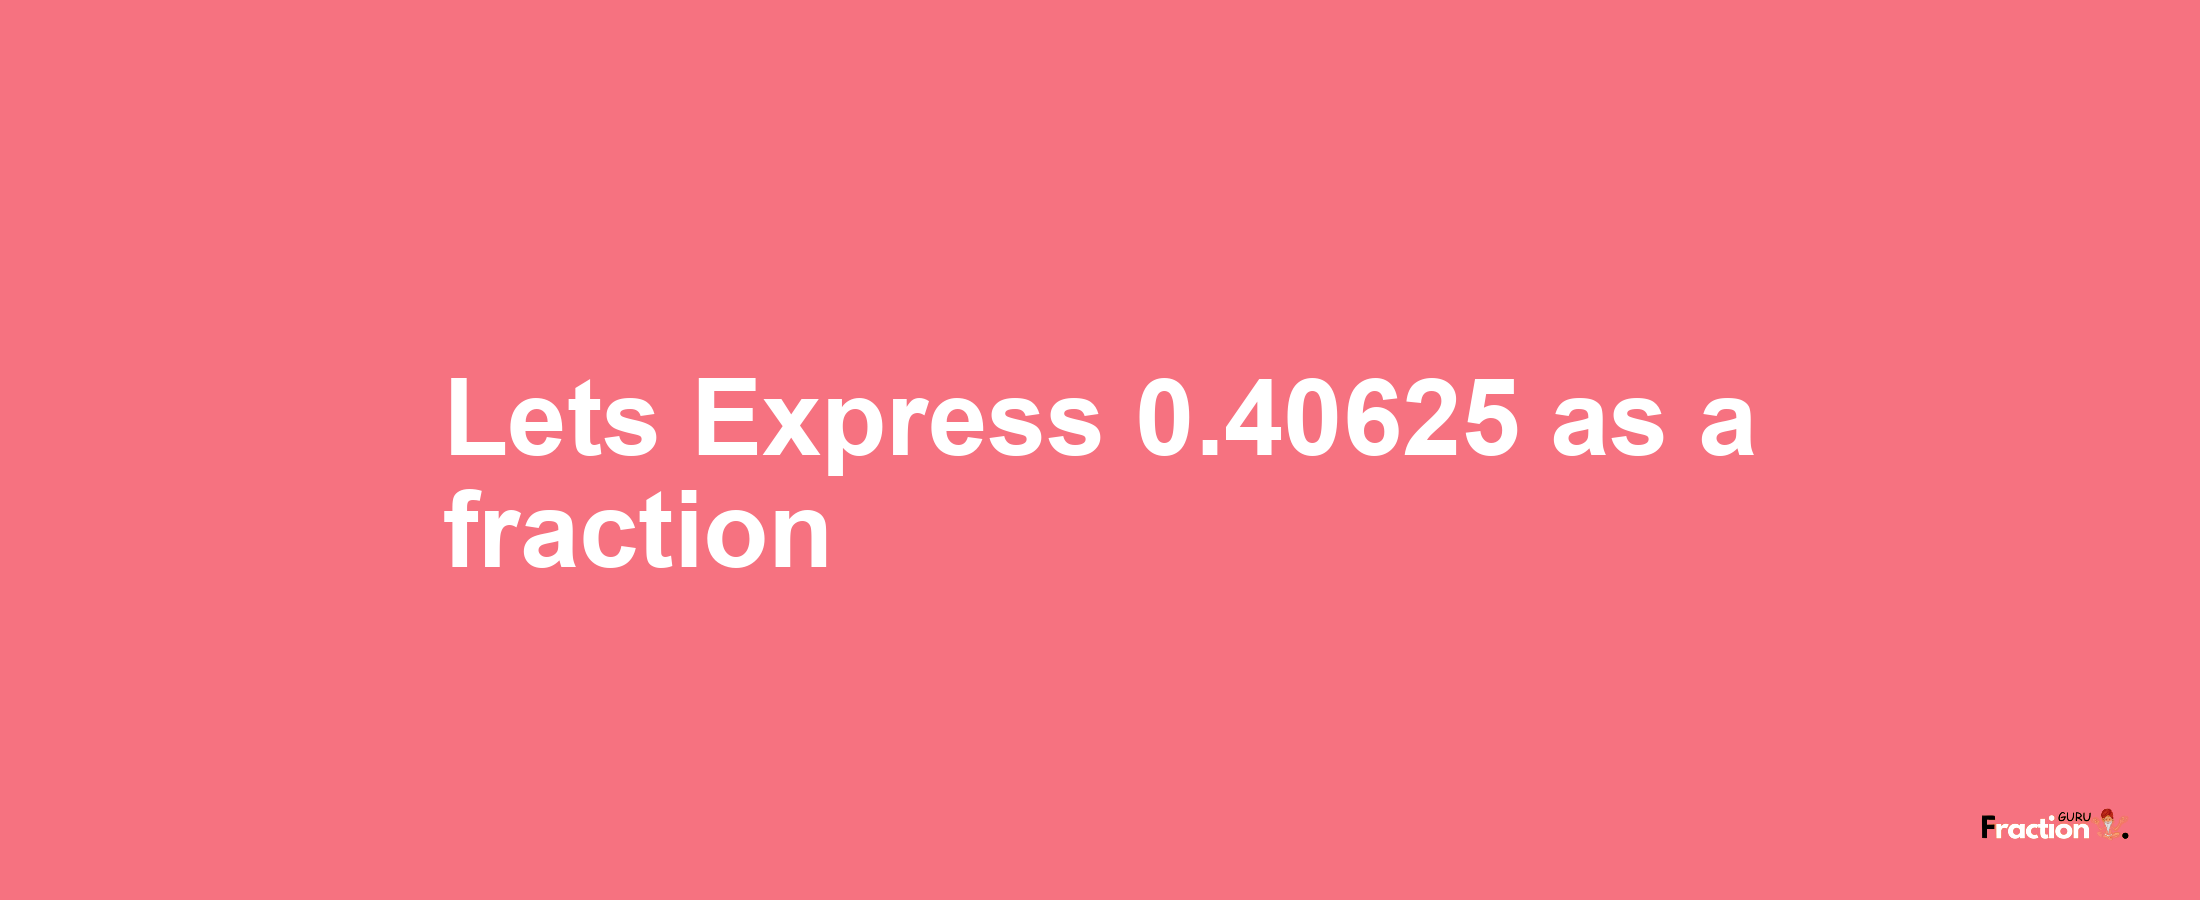 Lets Express 0.40625 as afraction